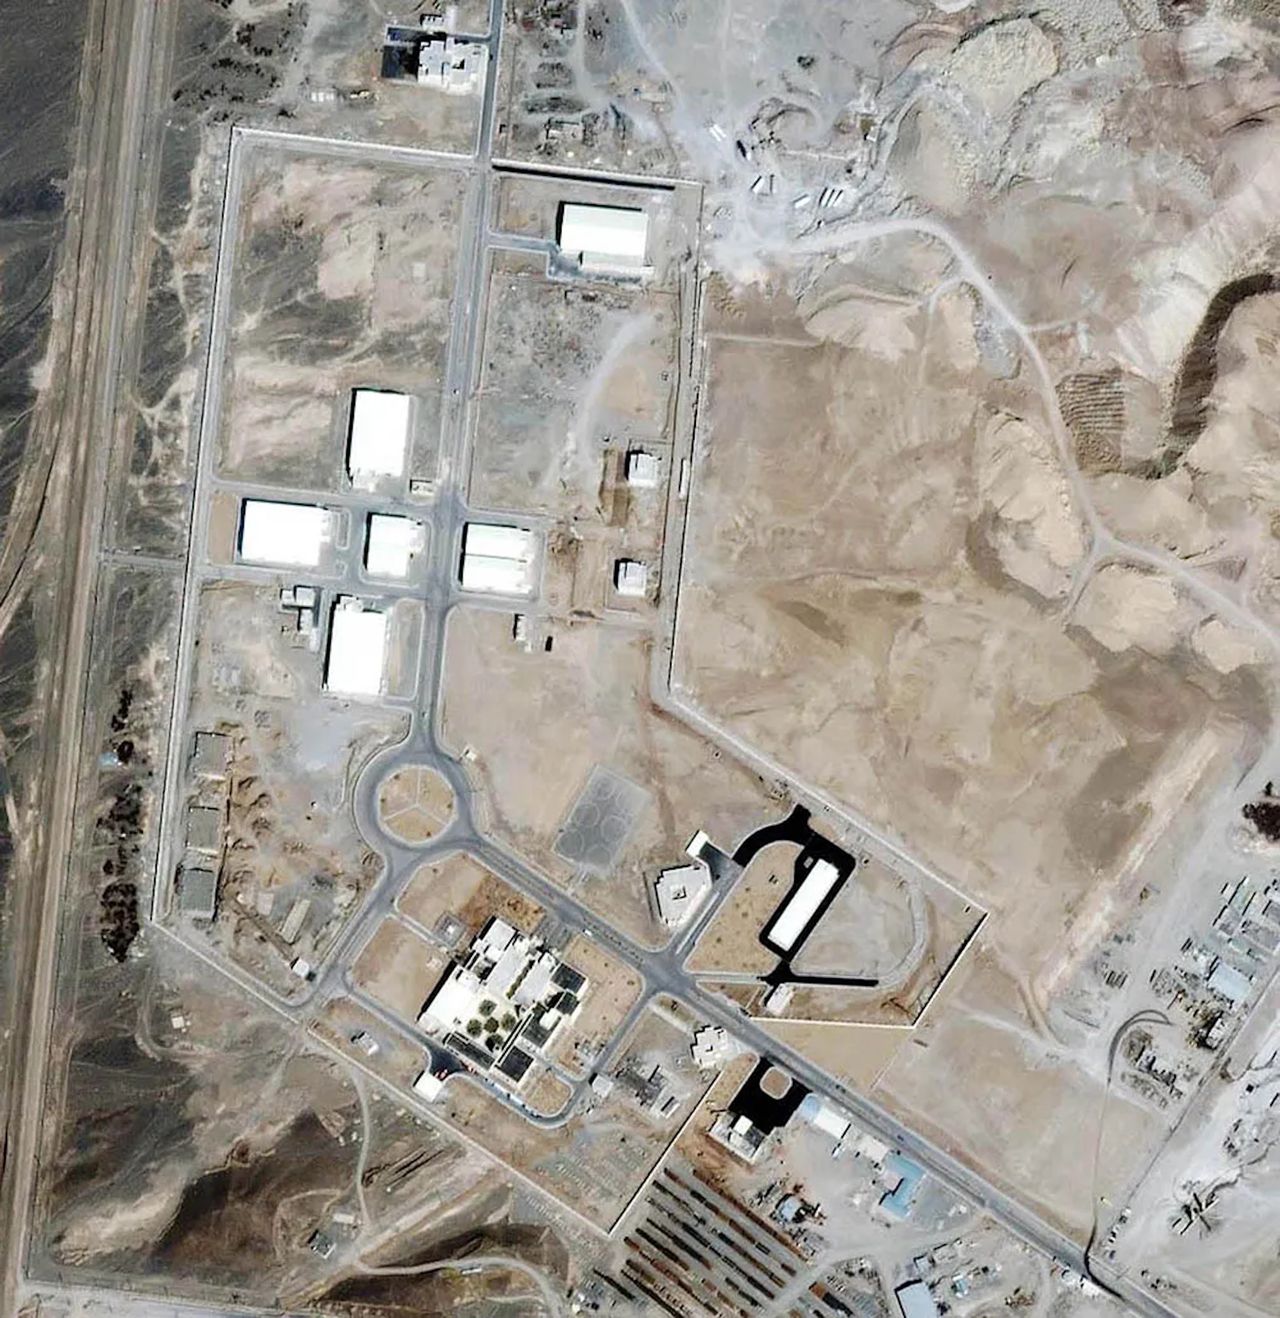 One of the targets of Stuxnet was supposed to be Iranian nuclear facilities in Natanz.